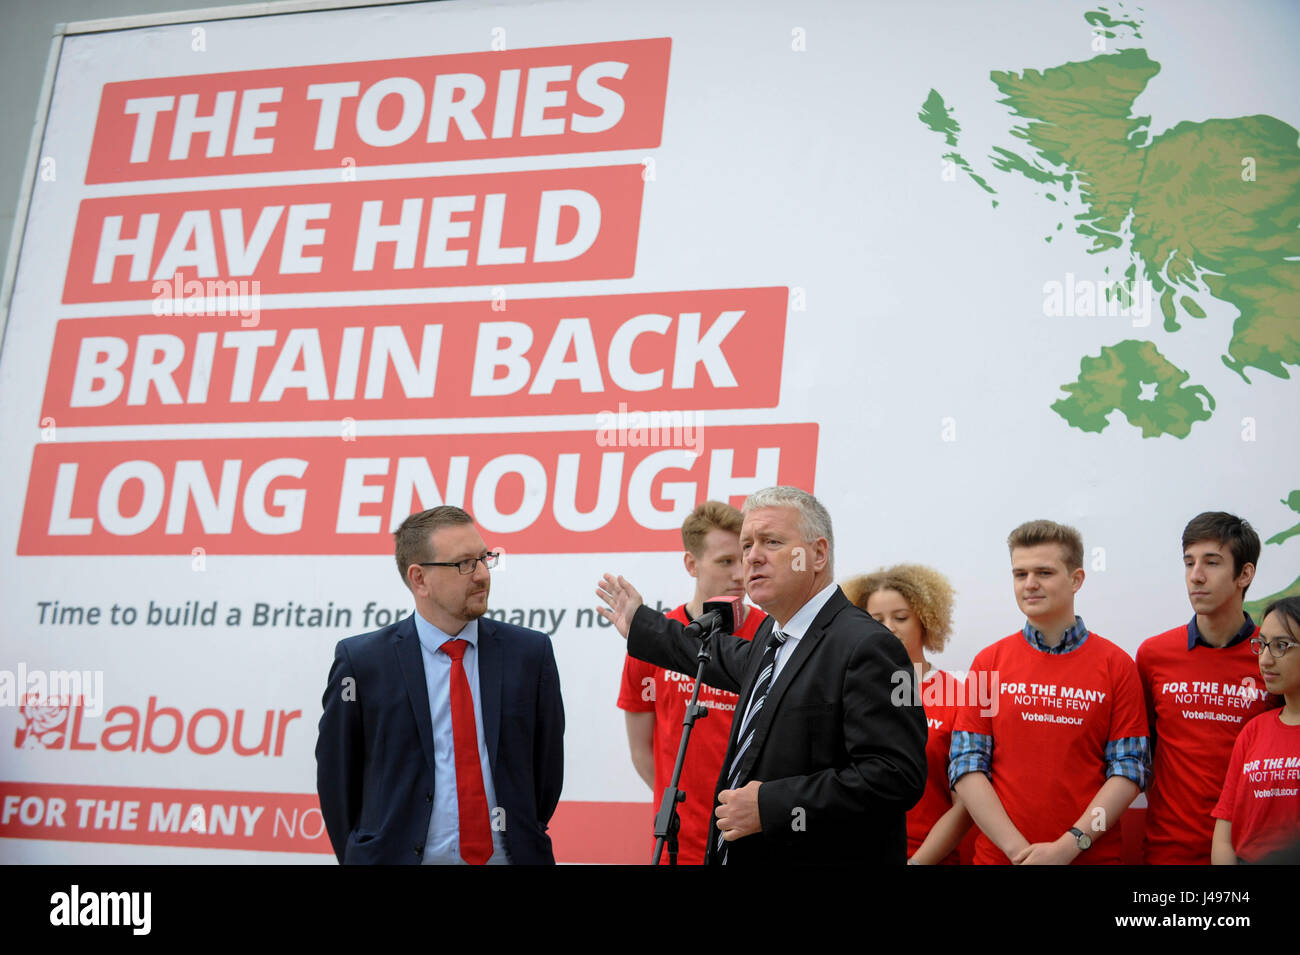 London, UK.  11 May 2017.  (L to R) Andrew Gwynne MP, National Elections and Campaigns Co-ordinator and Ian Lavery MP, National Elections and Campaigns Co-ordinator, unveil a new campaign poster for Labour’s General Election campaign at a press call on the South Bank.  Jeremy Corbyn, Leader of the Labour Party, was scheduled to speak, but was called away on other business.   Credit: Stephen Chung / Alamy Live News Stock Photo